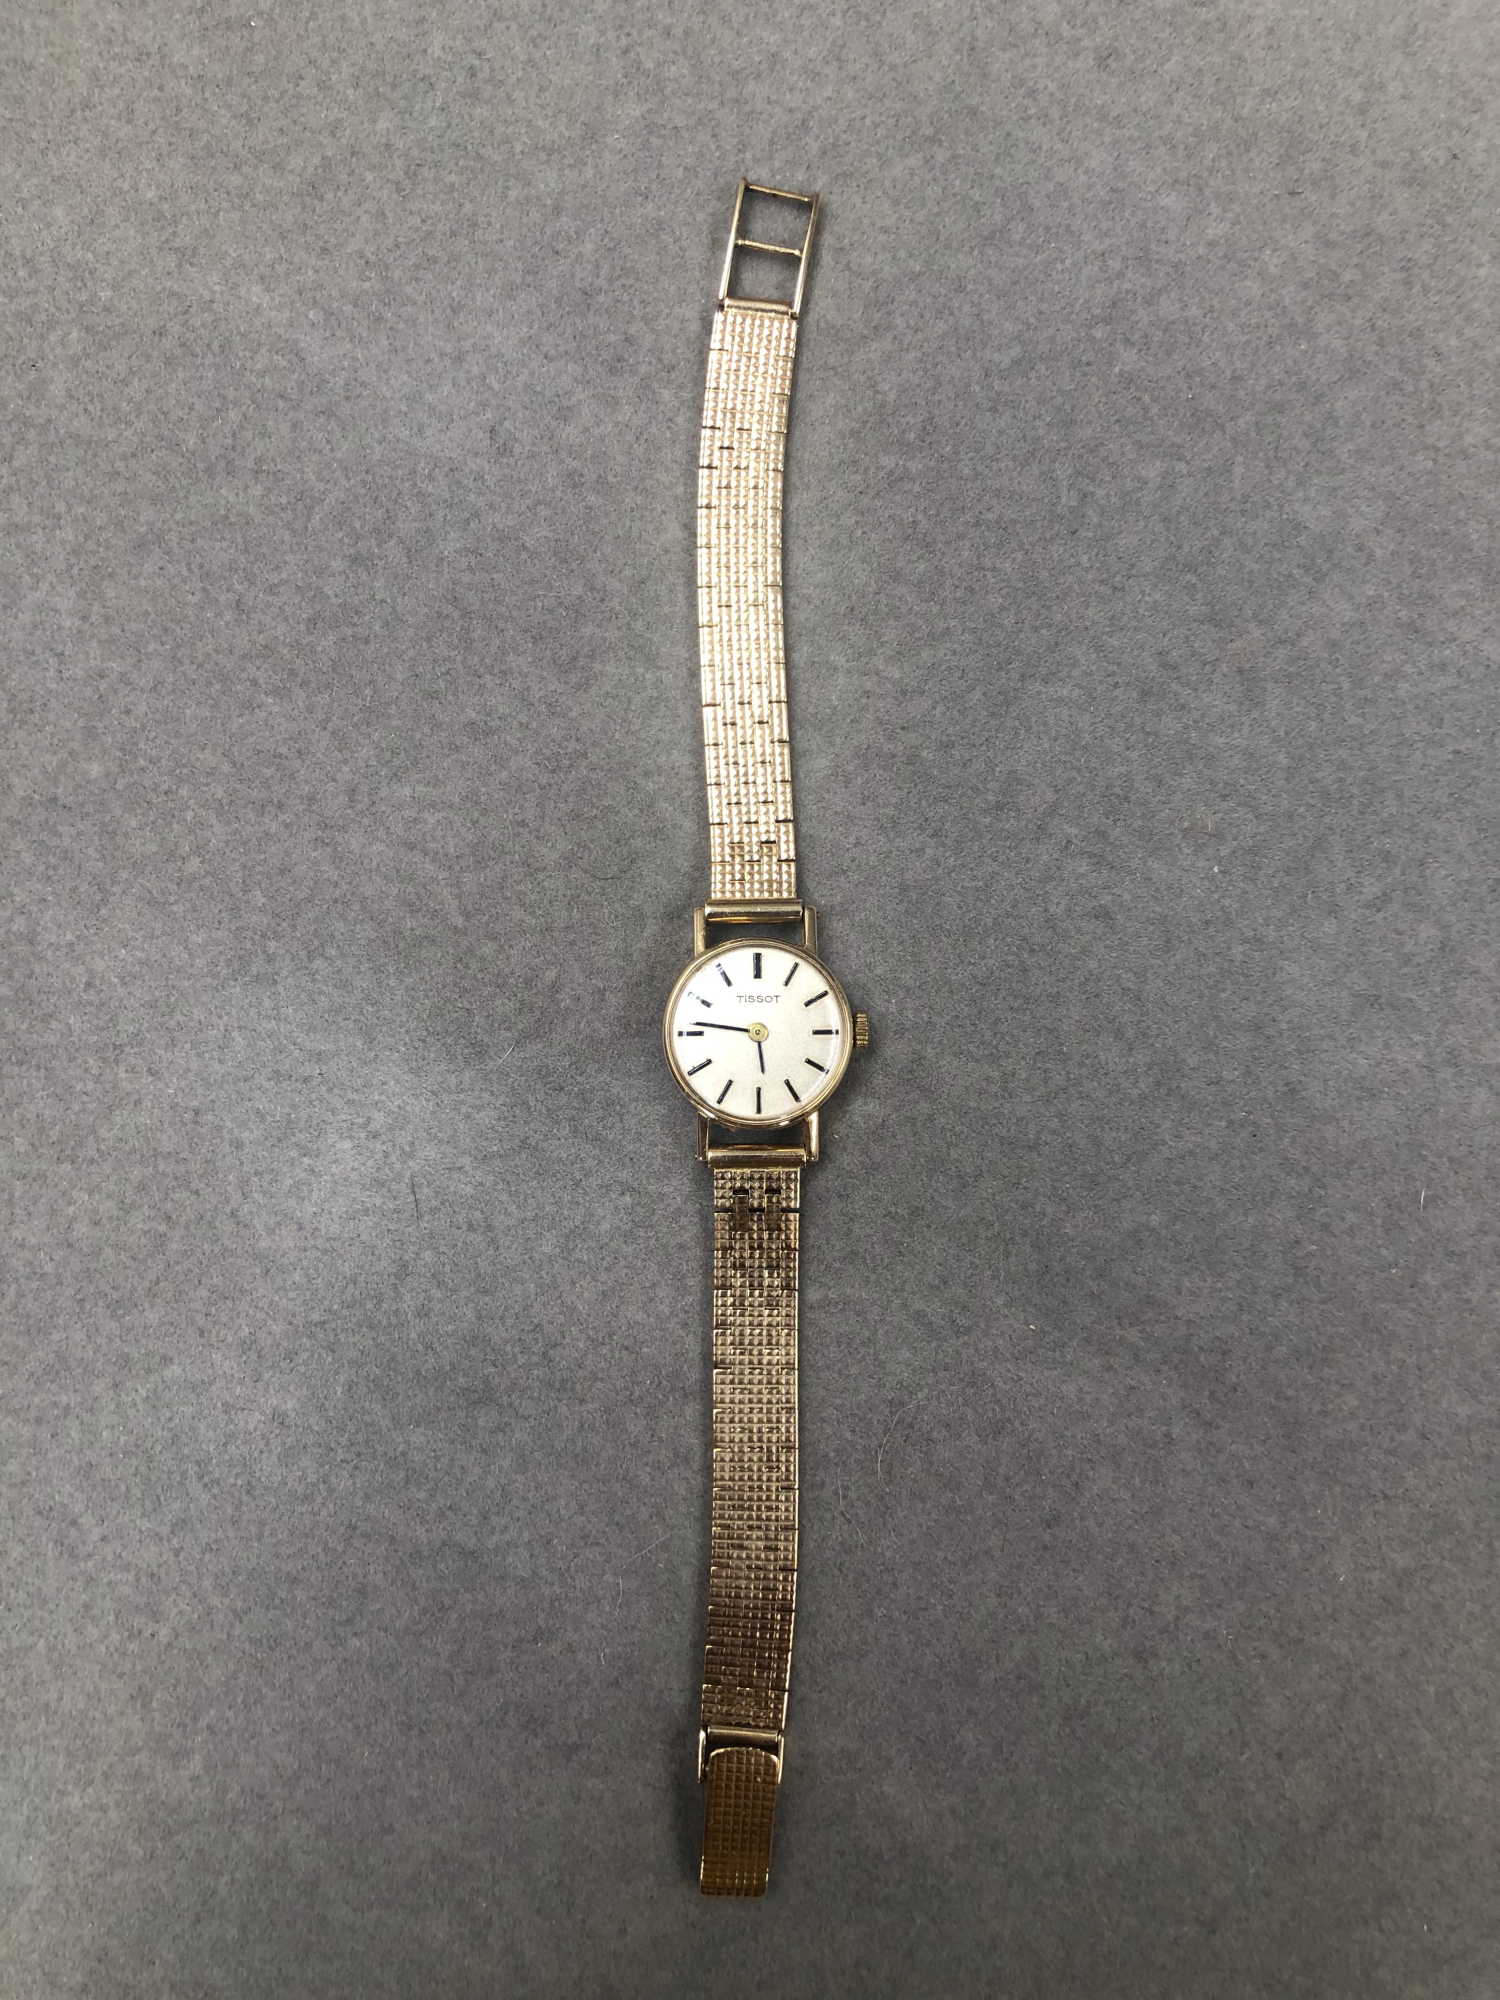 A 9ct GOLD TISSOT LADIES WRIST WATCH ON A BRICK STYLE STRAP WITH LADDER CLASP GROSS WEIGHT 21.2 grms - Image 2 of 7